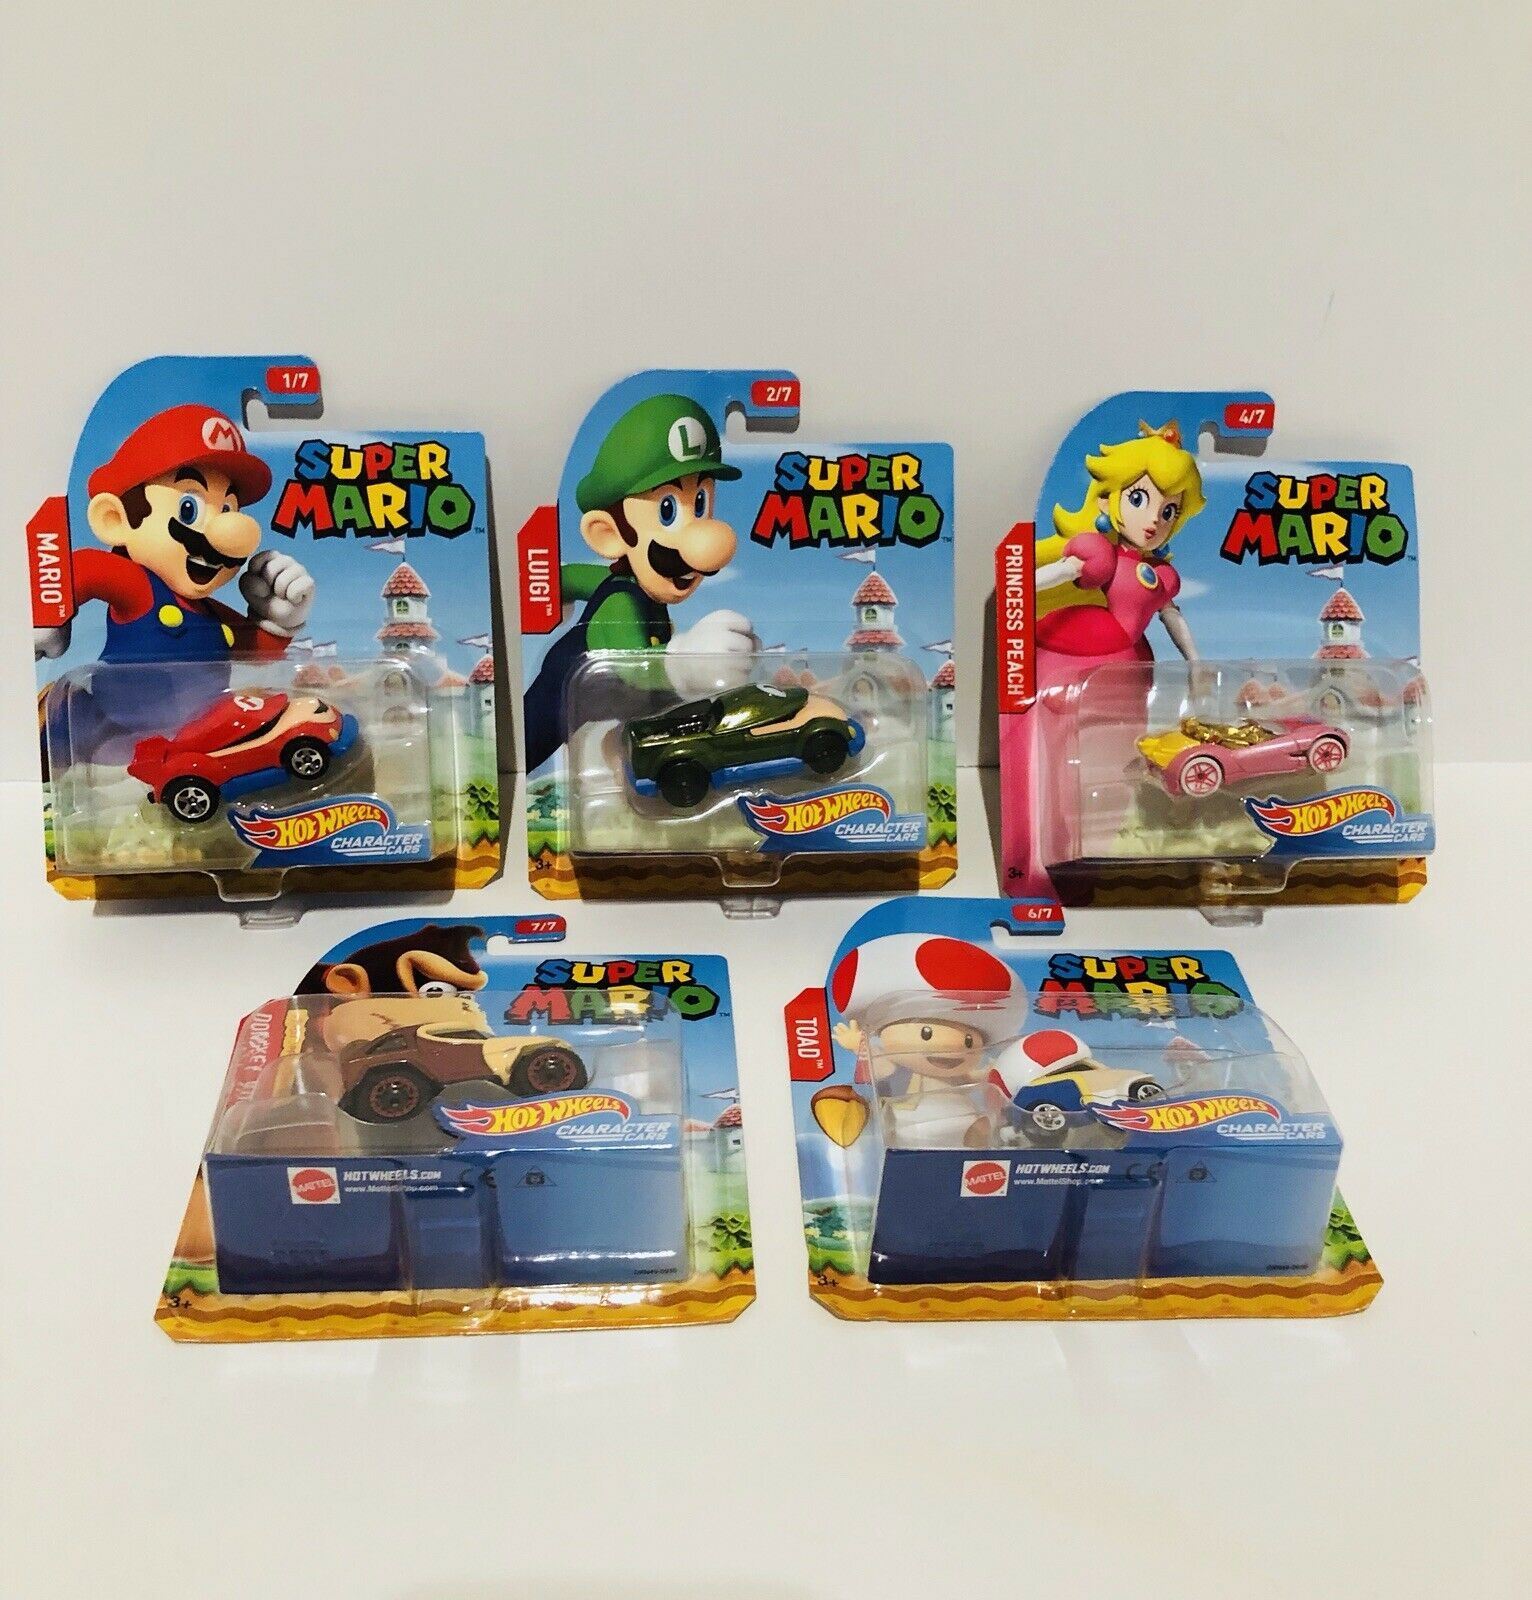 2017 HOT WHEELS MARIO, LUIGI, PEACH, TOAD & DONKEY KONG LOT OF 5 DIECAST CARS - Awesome Deals Deluxe